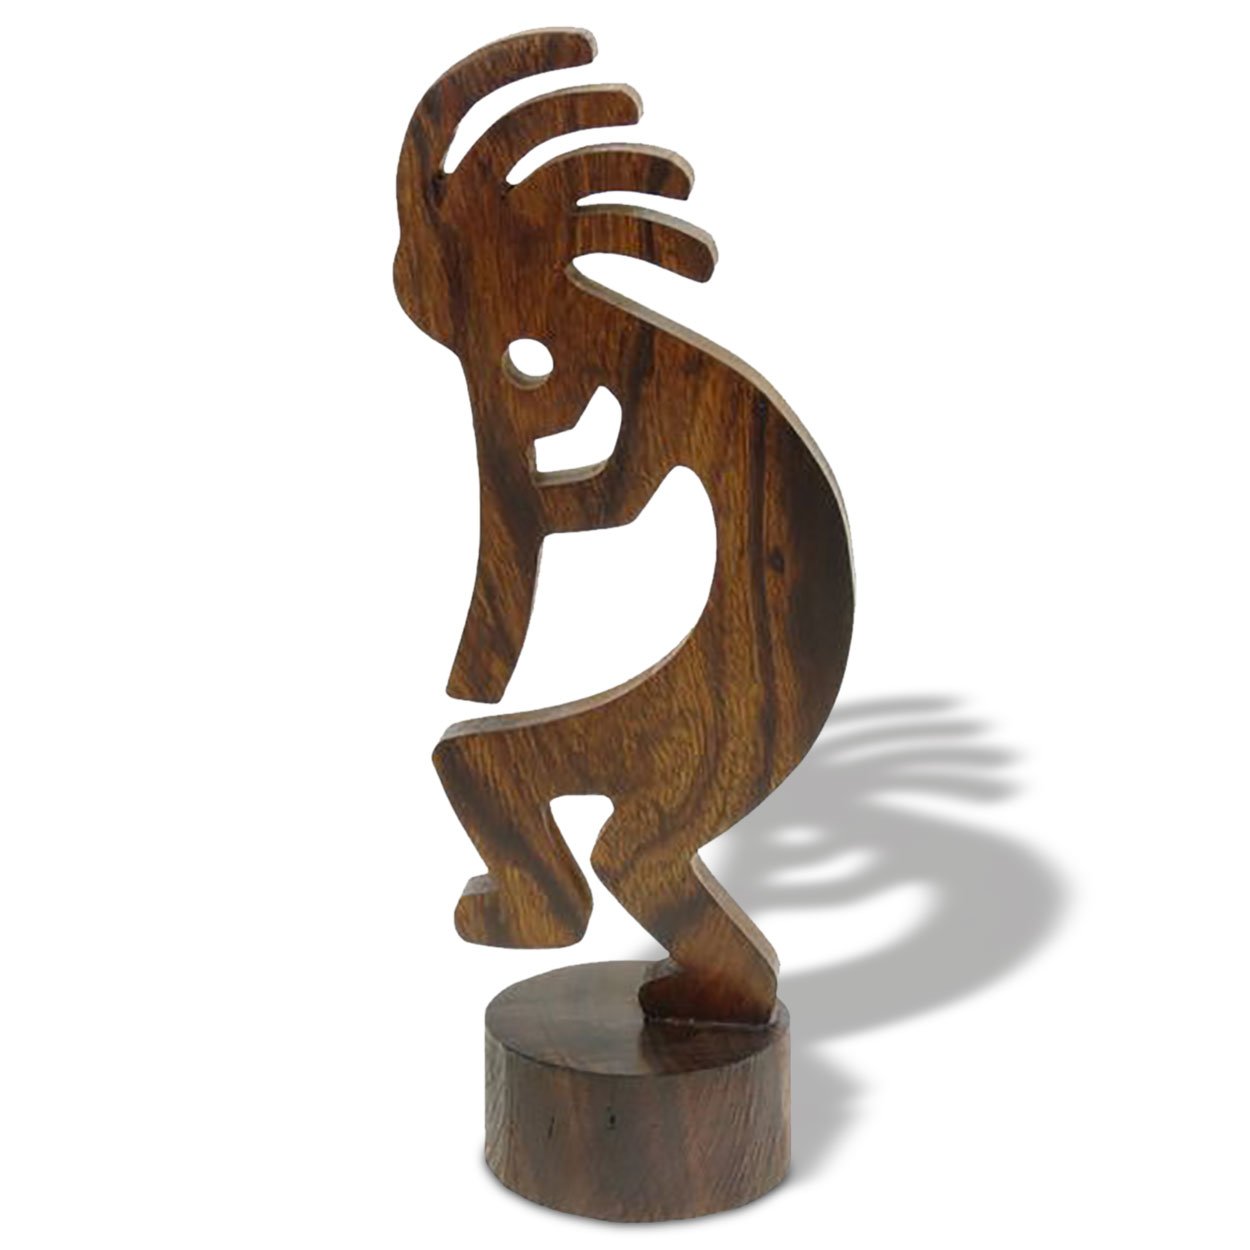 172171 - 9in Tall Kokopelli Hand-Carved in Ironwood